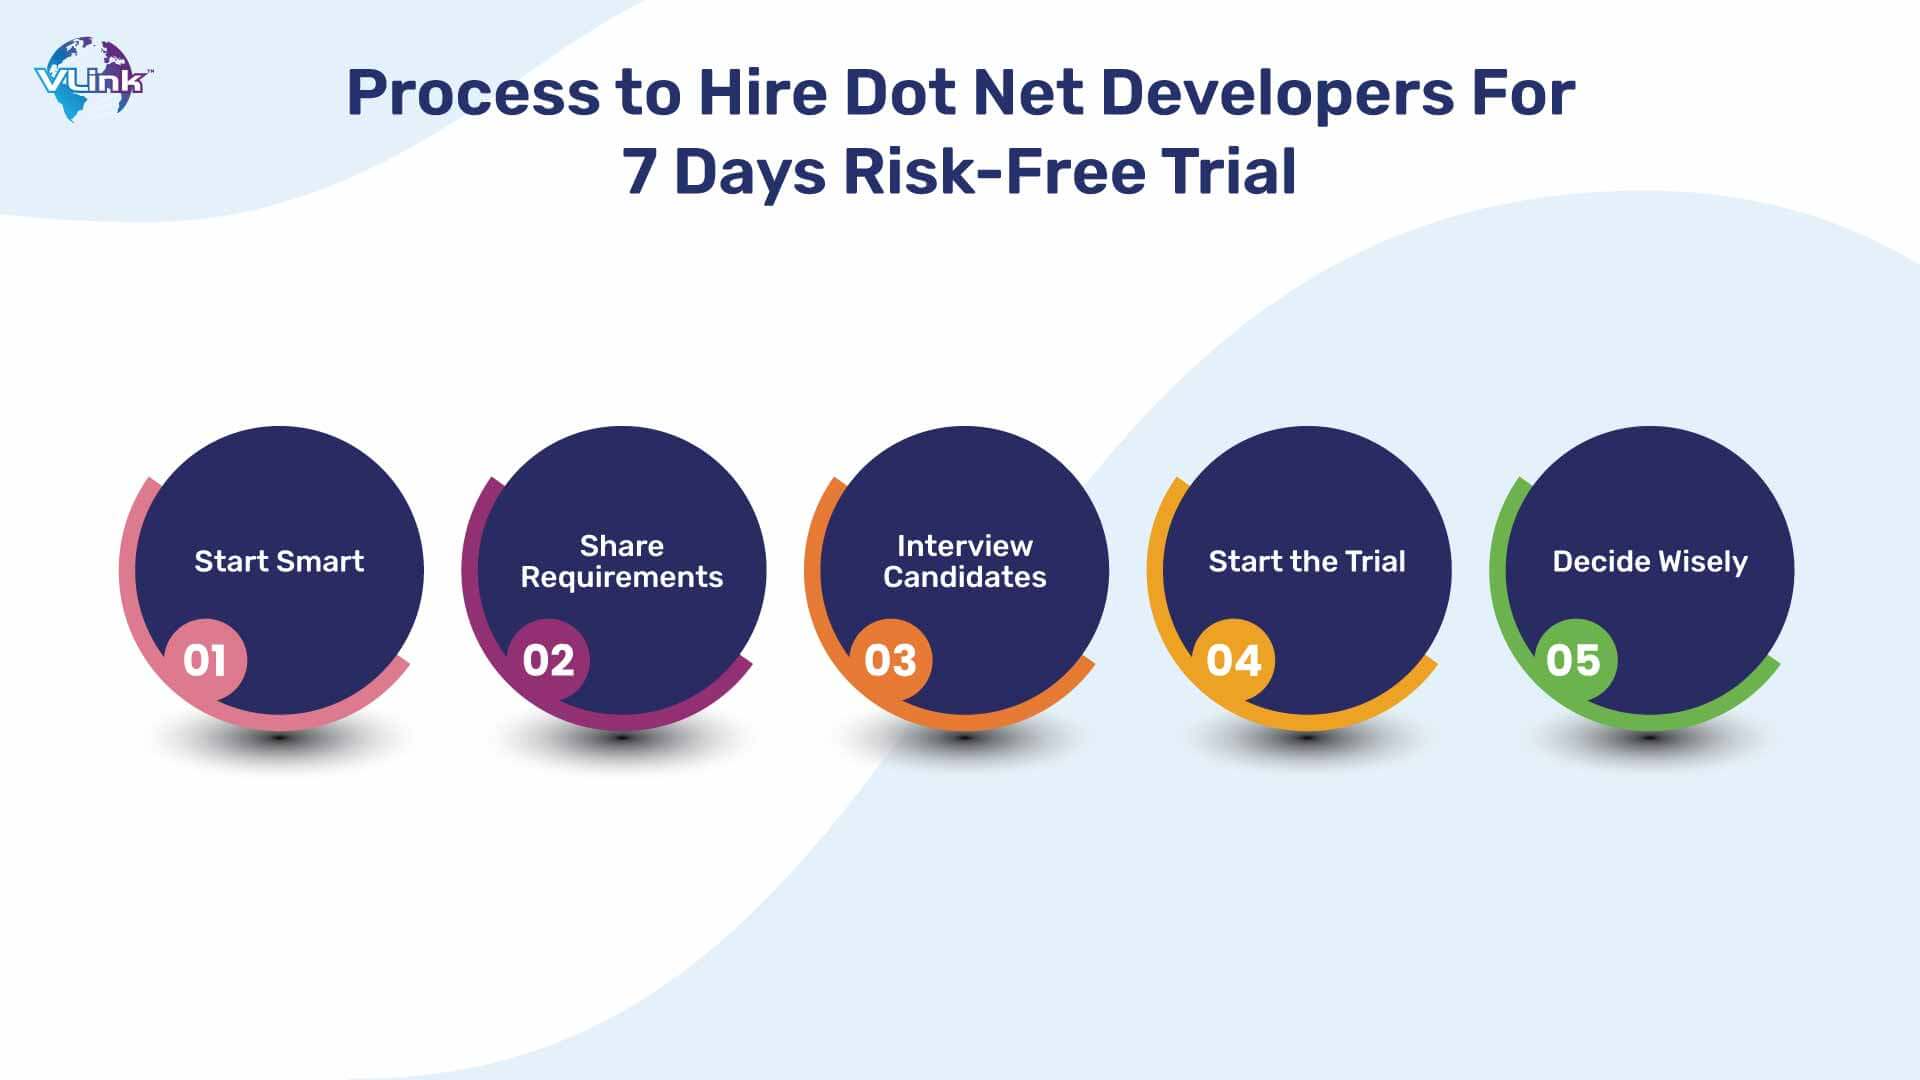 Process to Hire Dot NET Developers for 7 Days Risk Free Trial